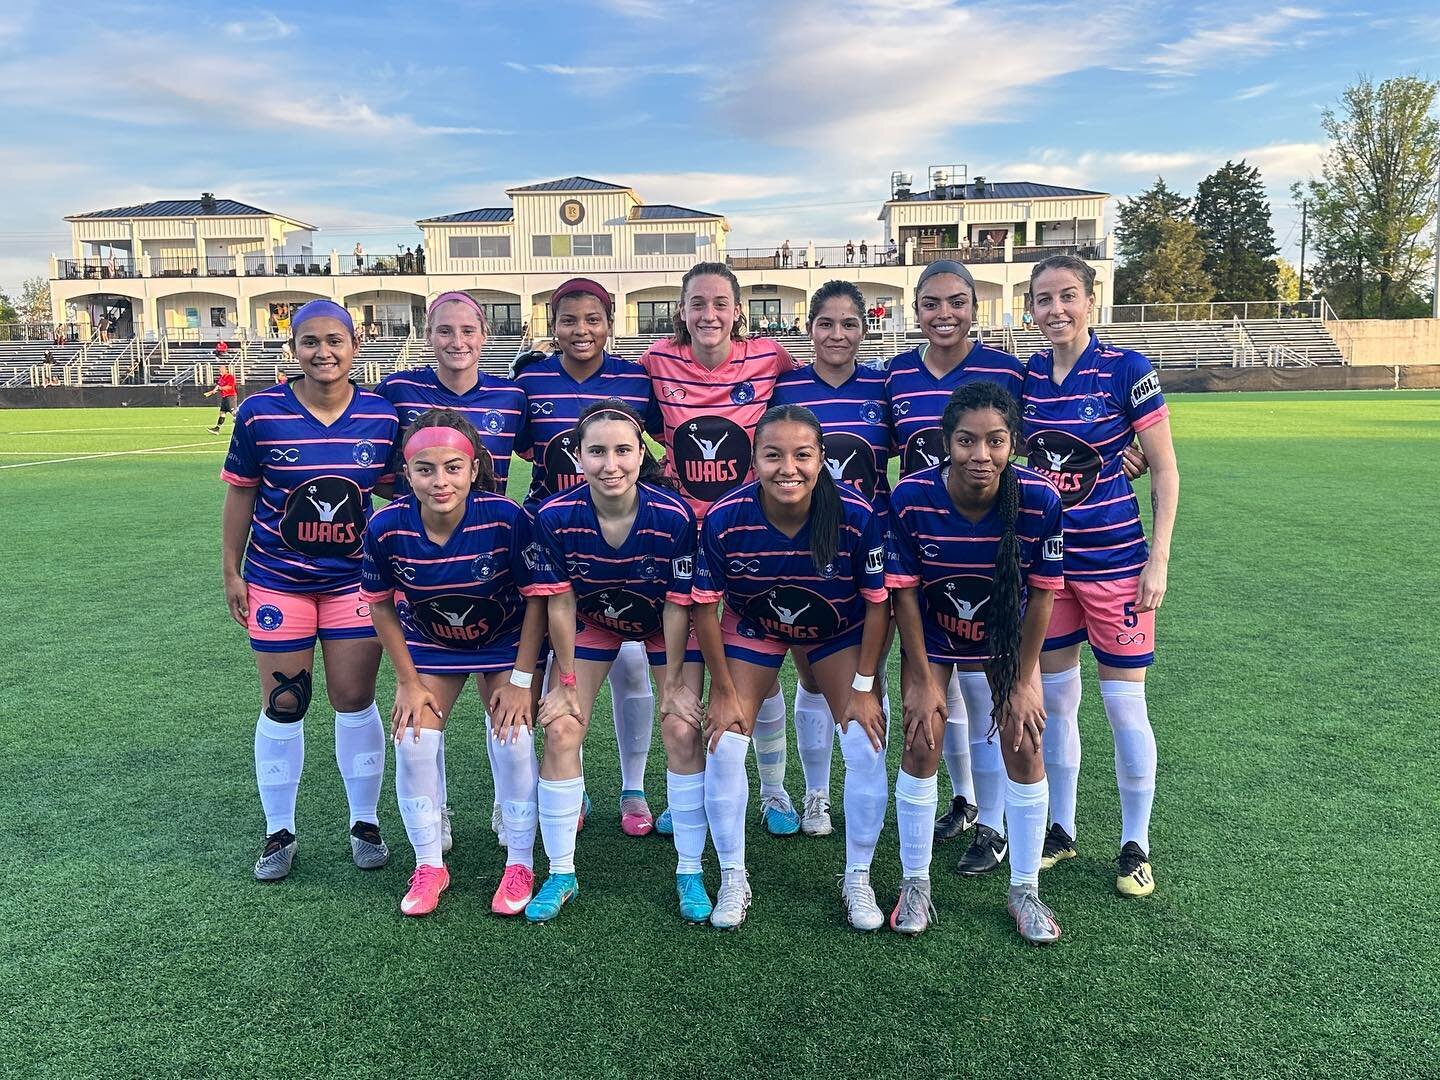 Proud of these ladies today 💪🏻🎉🏴&zwj;☠️ 
@USLWLeague  and the uniforms looked sharp @WAGSinsoccer